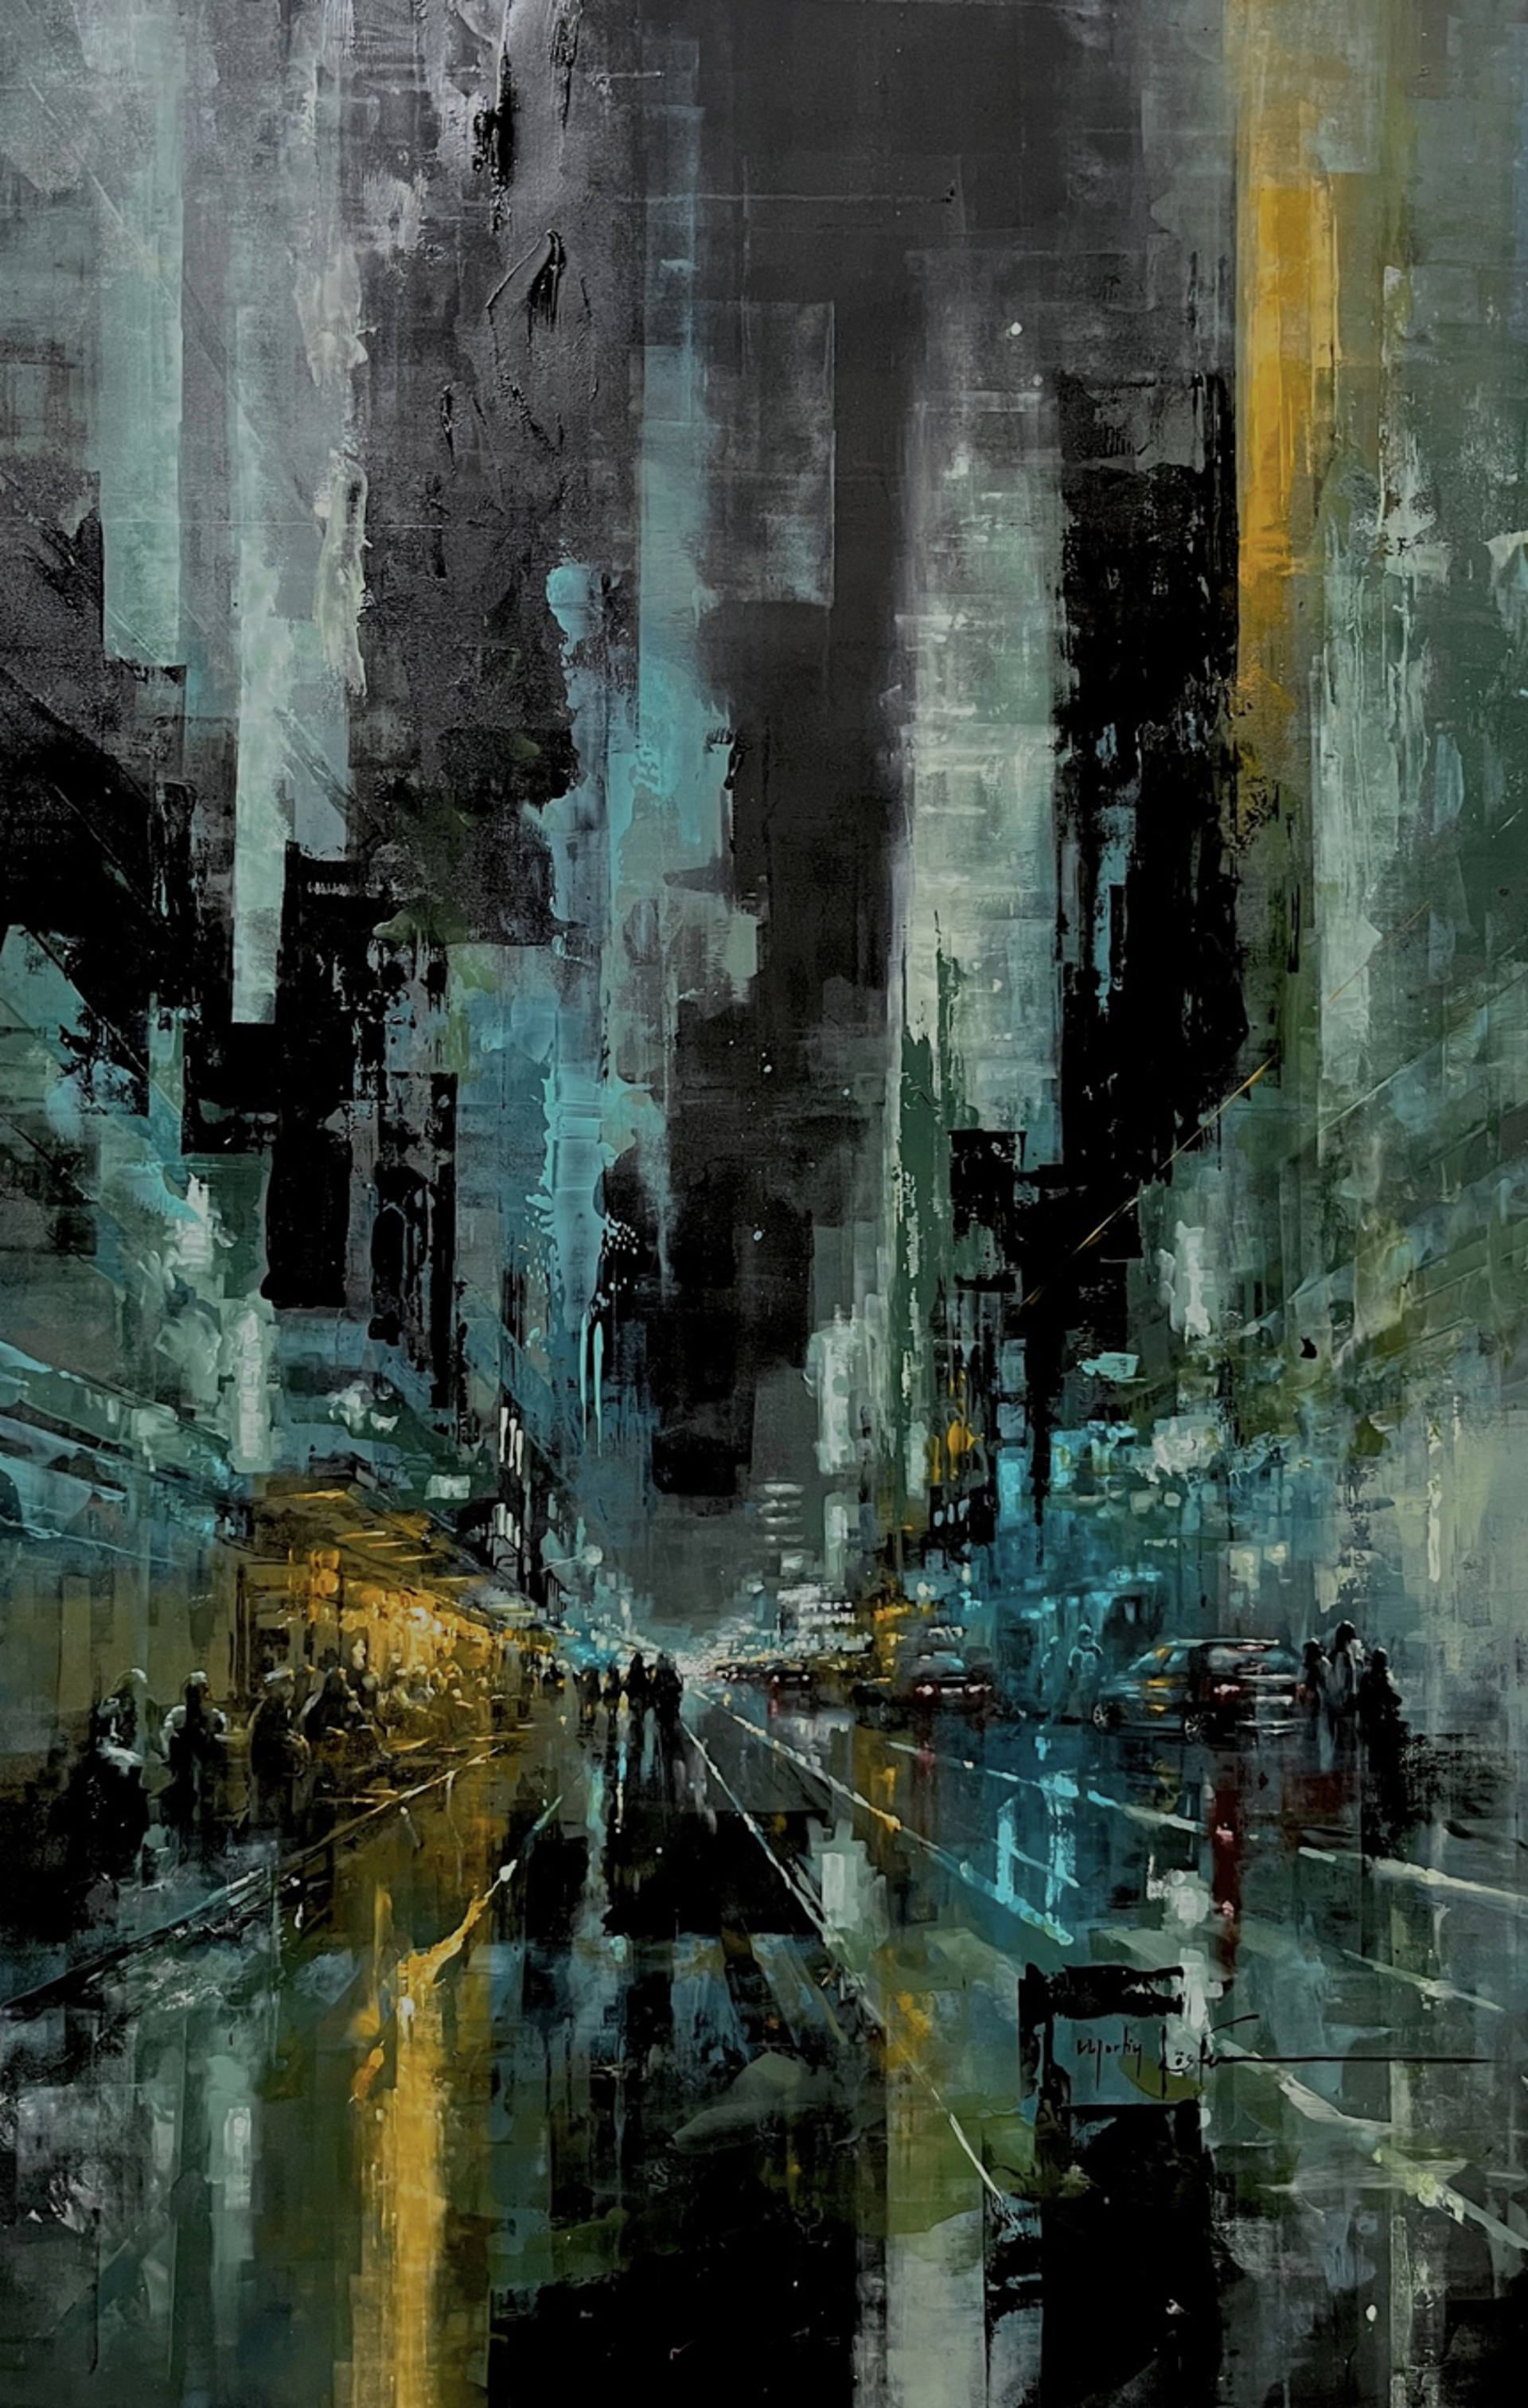 New York Midnight in the City XVII by Martin Koester